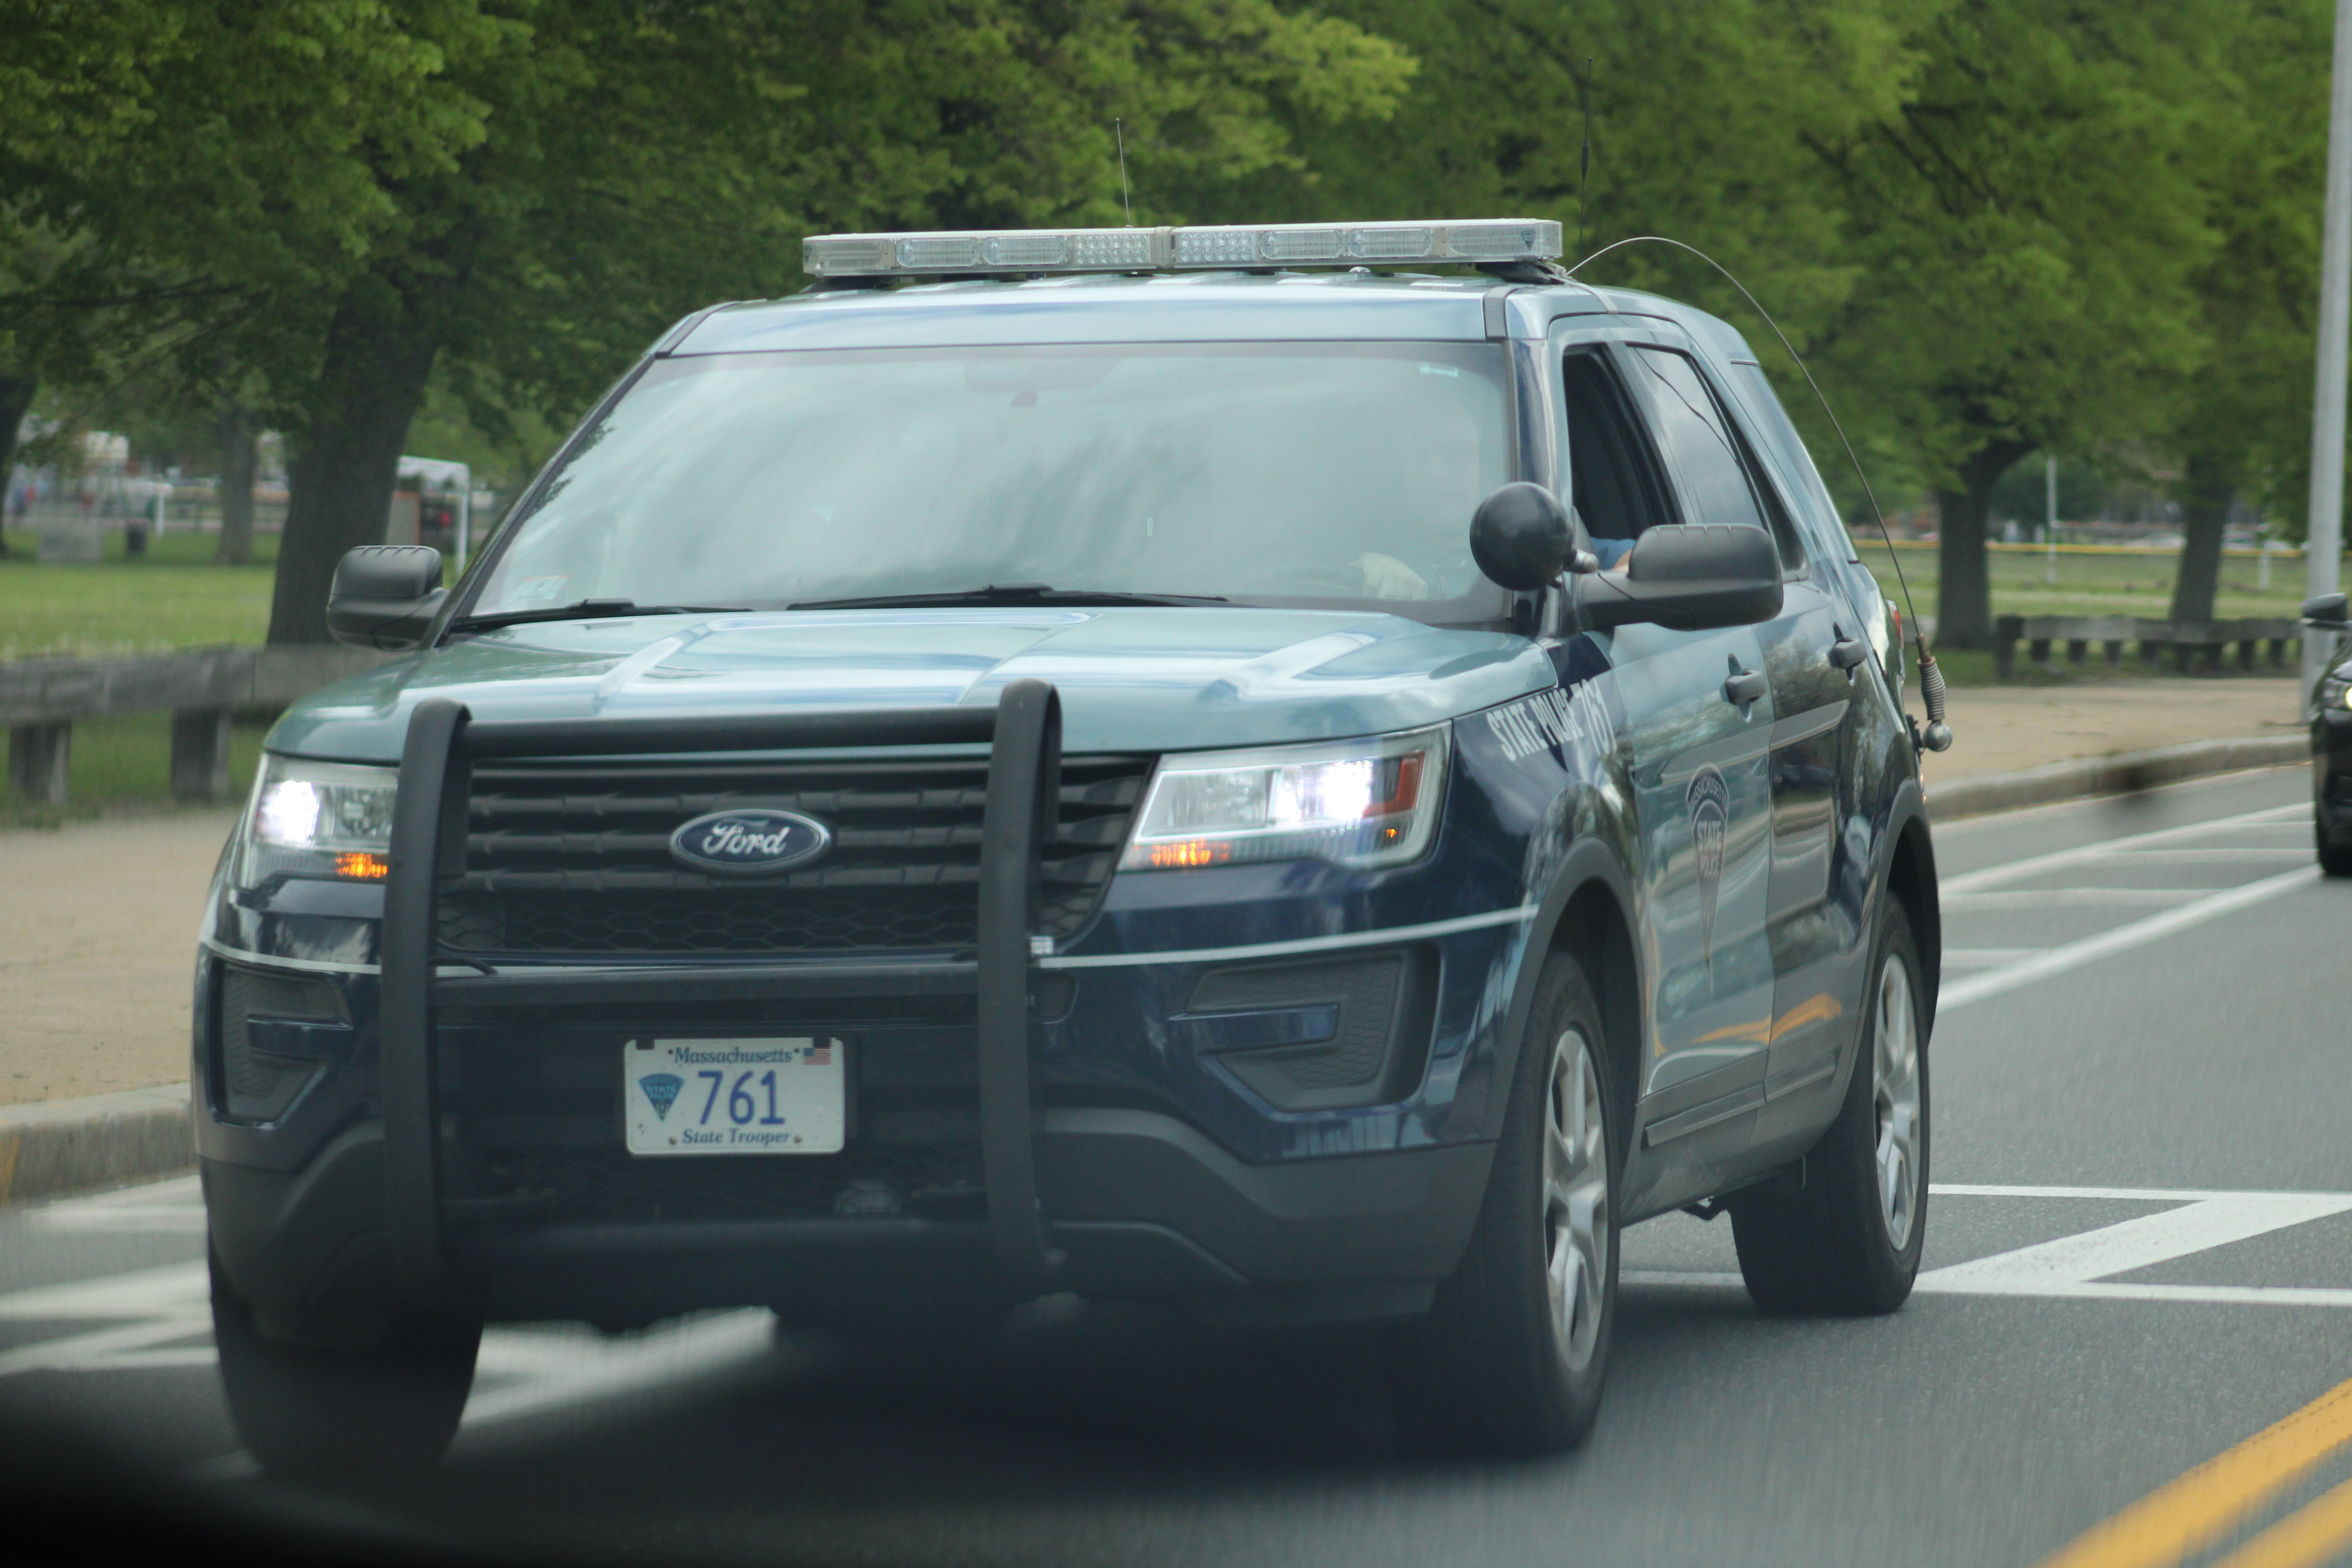 A photo  of Massachusetts State Police
            Cruiser 761, a 2017 Ford Police Interceptor Utility             taken by @riemergencyvehicles